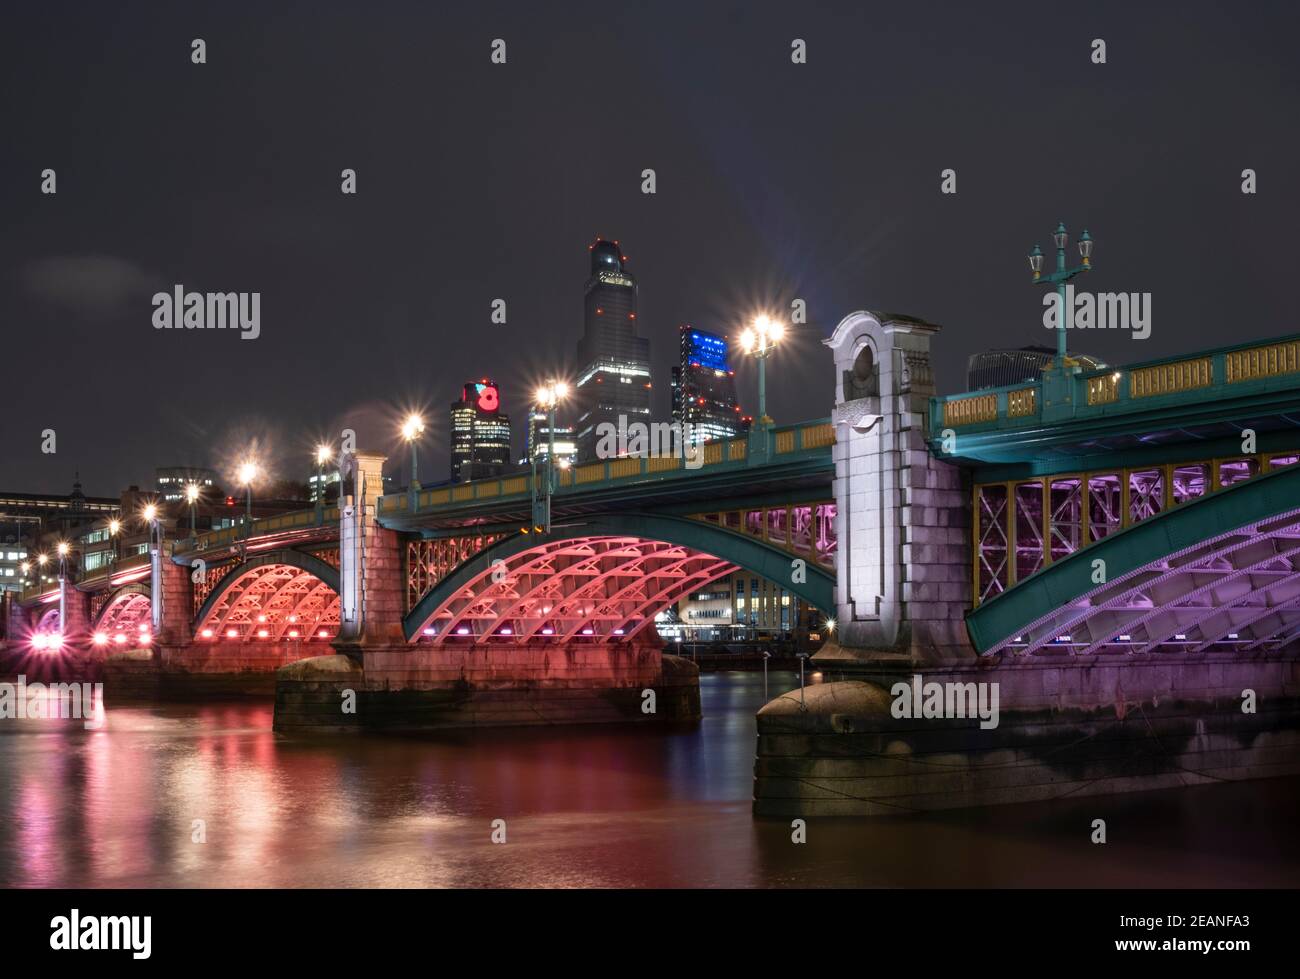 Southwark Bridge at night with illuminated buildings of the City of London financial district, Southwark, London, England, United Kingdom, Europe Stock Photo